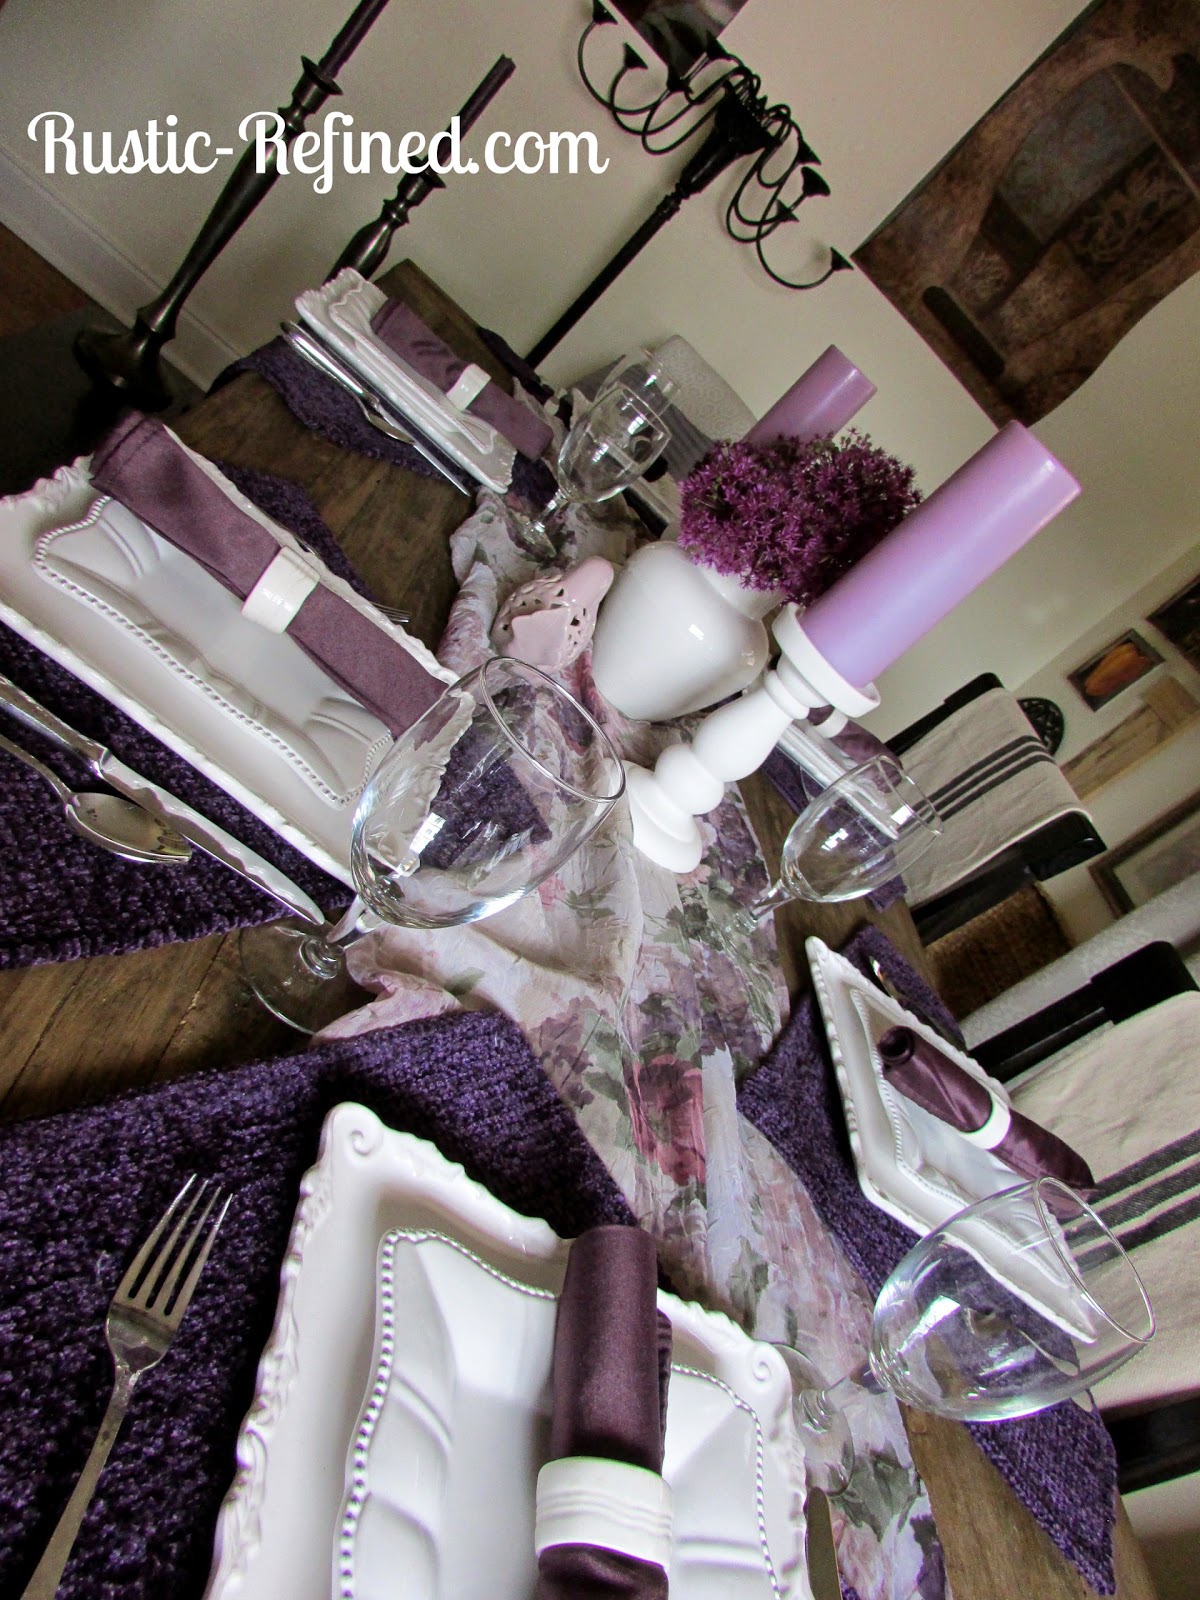 Purple Pinch Tuesday Tablescape